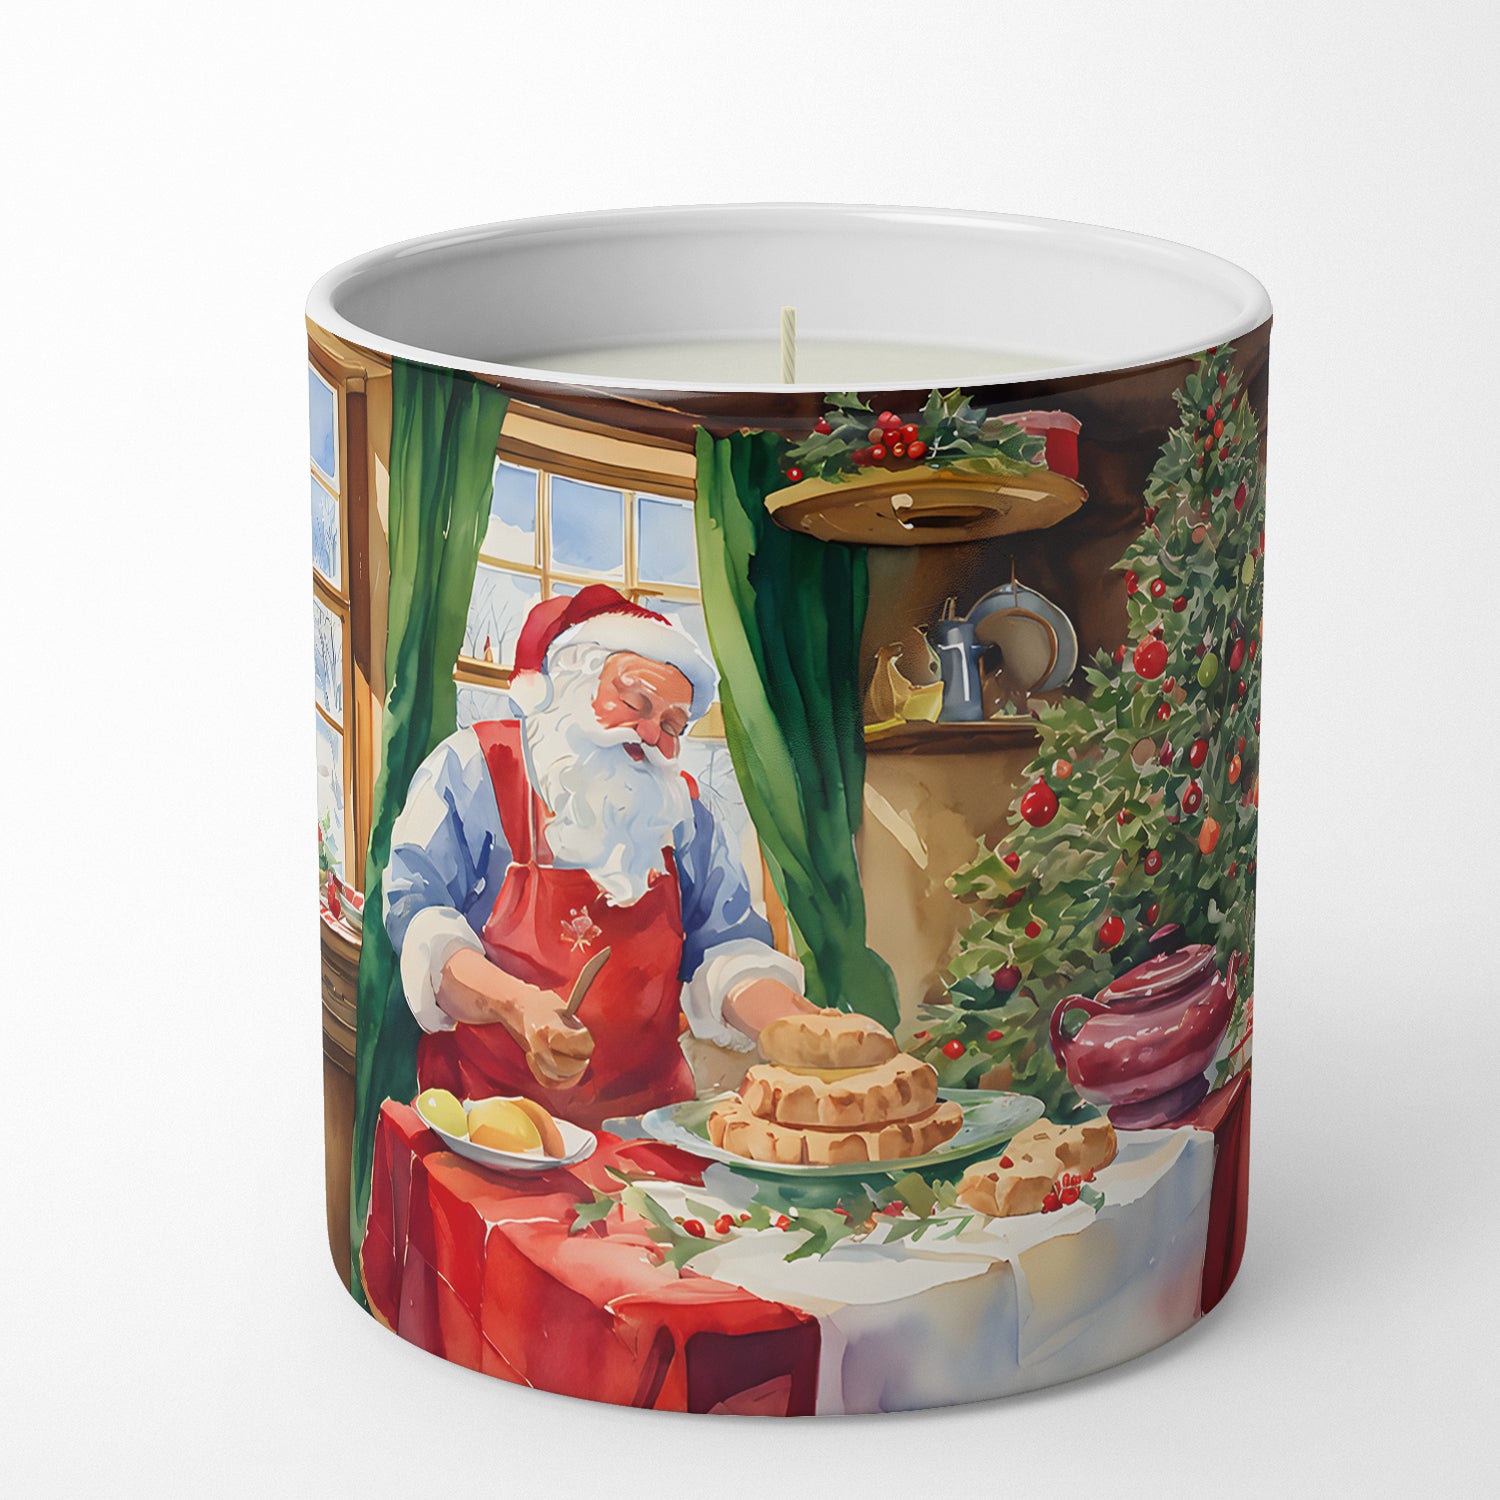 Buy this Cookies with Santa Claus Papa Noel Decorative Soy Candle